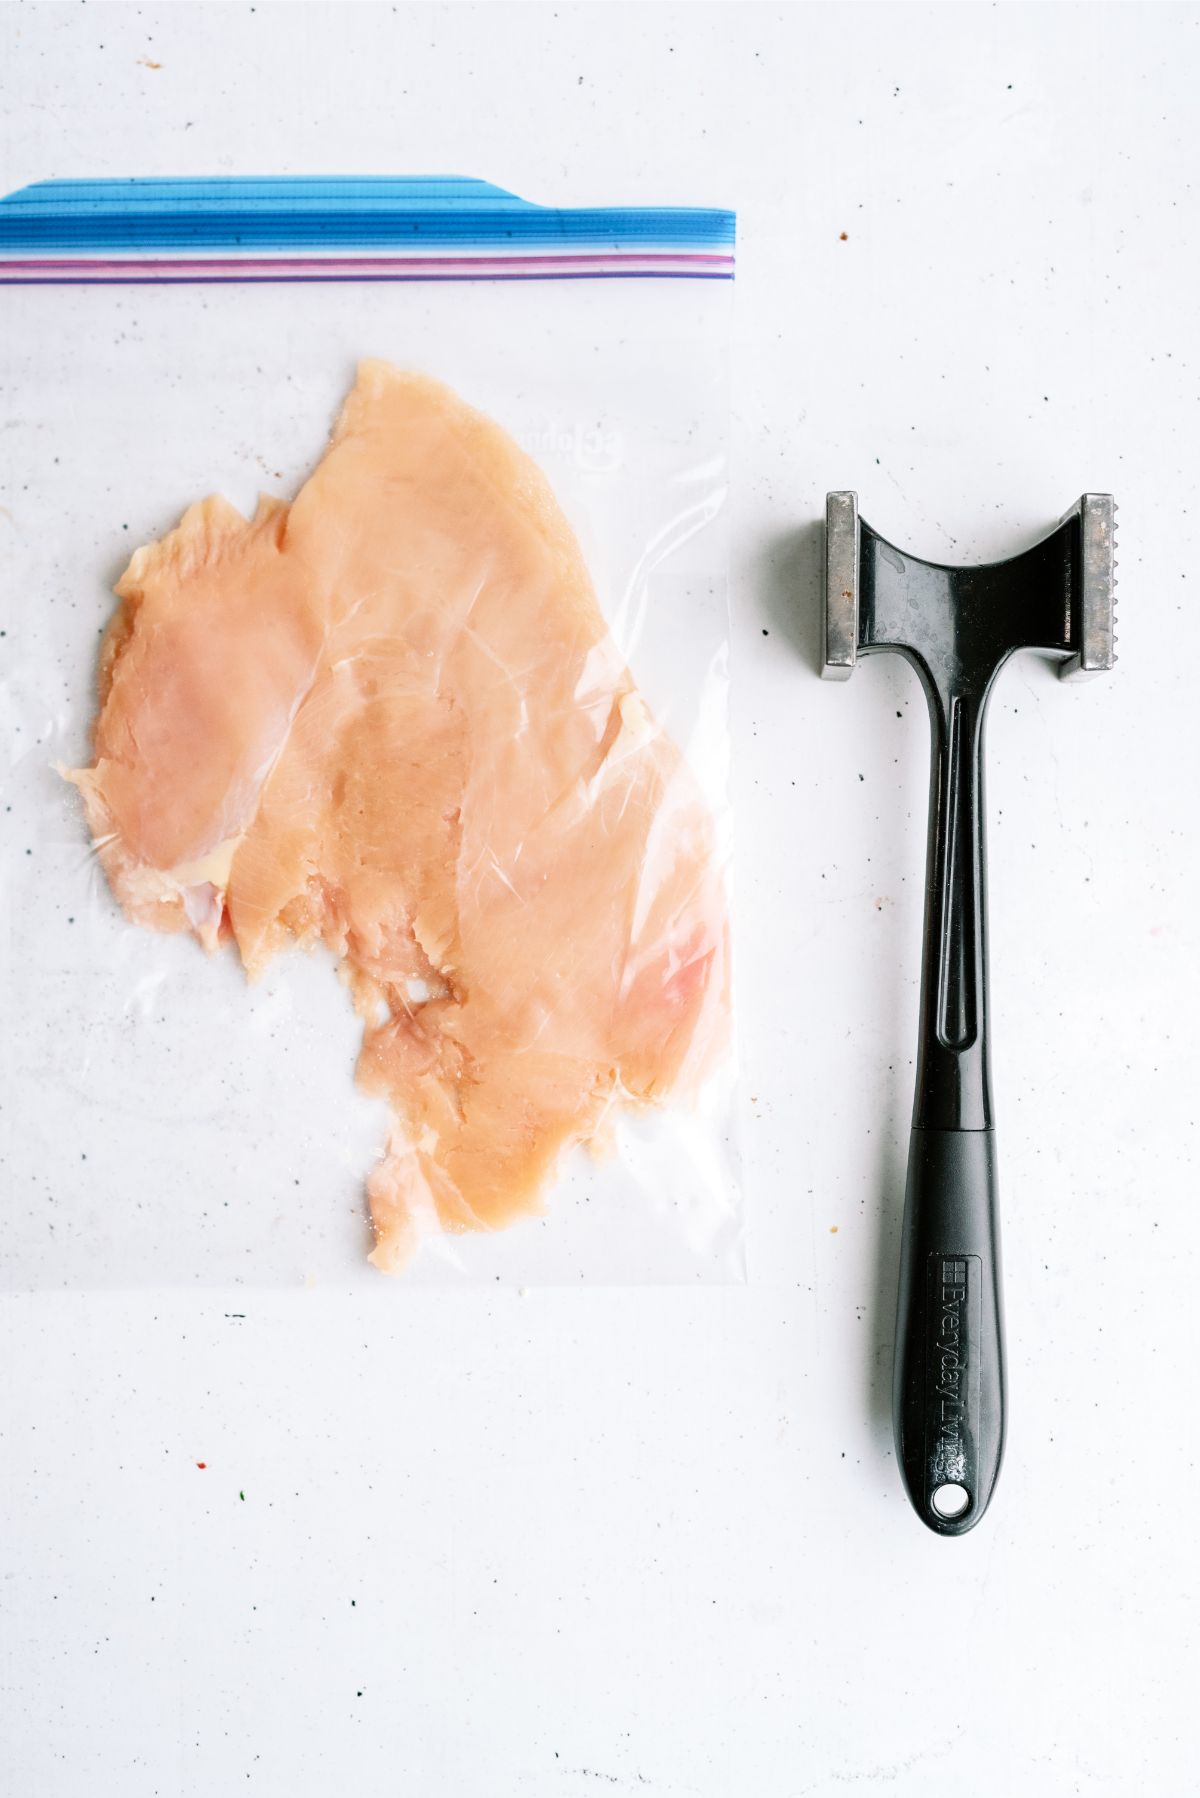 Chicken breast flattened in a plastic bag with a meat tenderizer